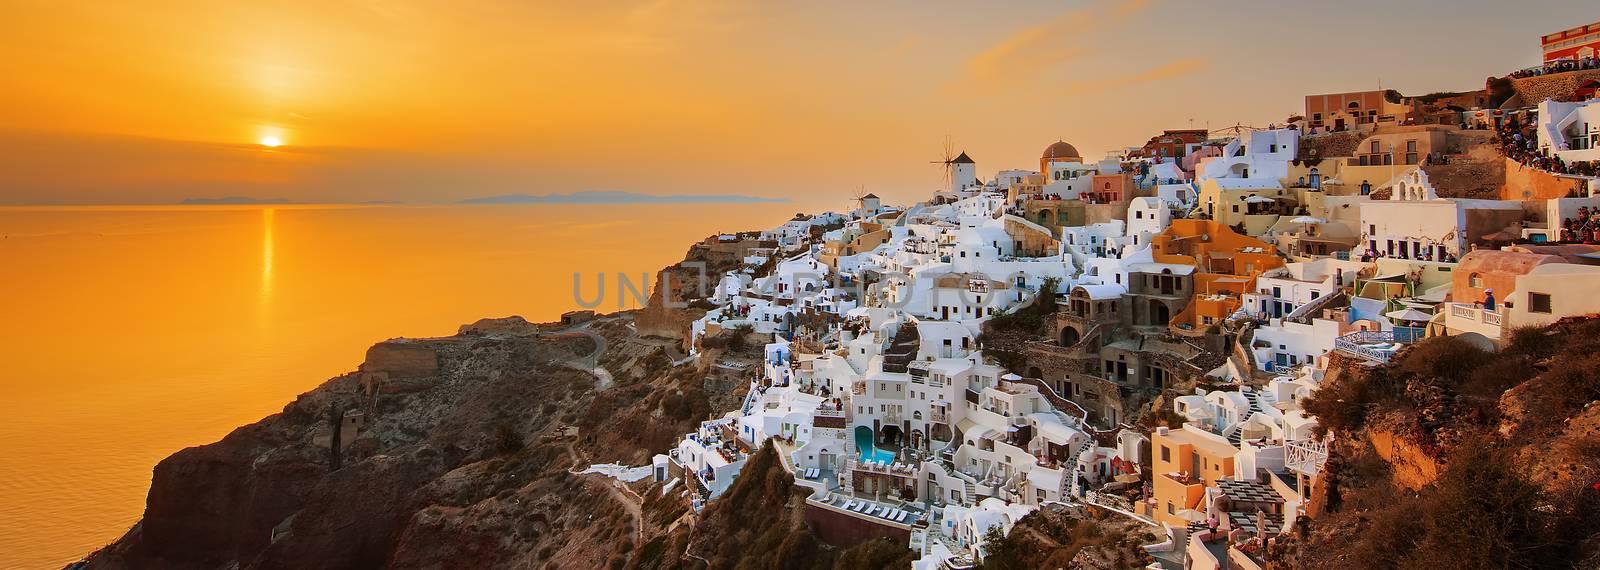 Oia at sunset, panoramic view by vwalakte